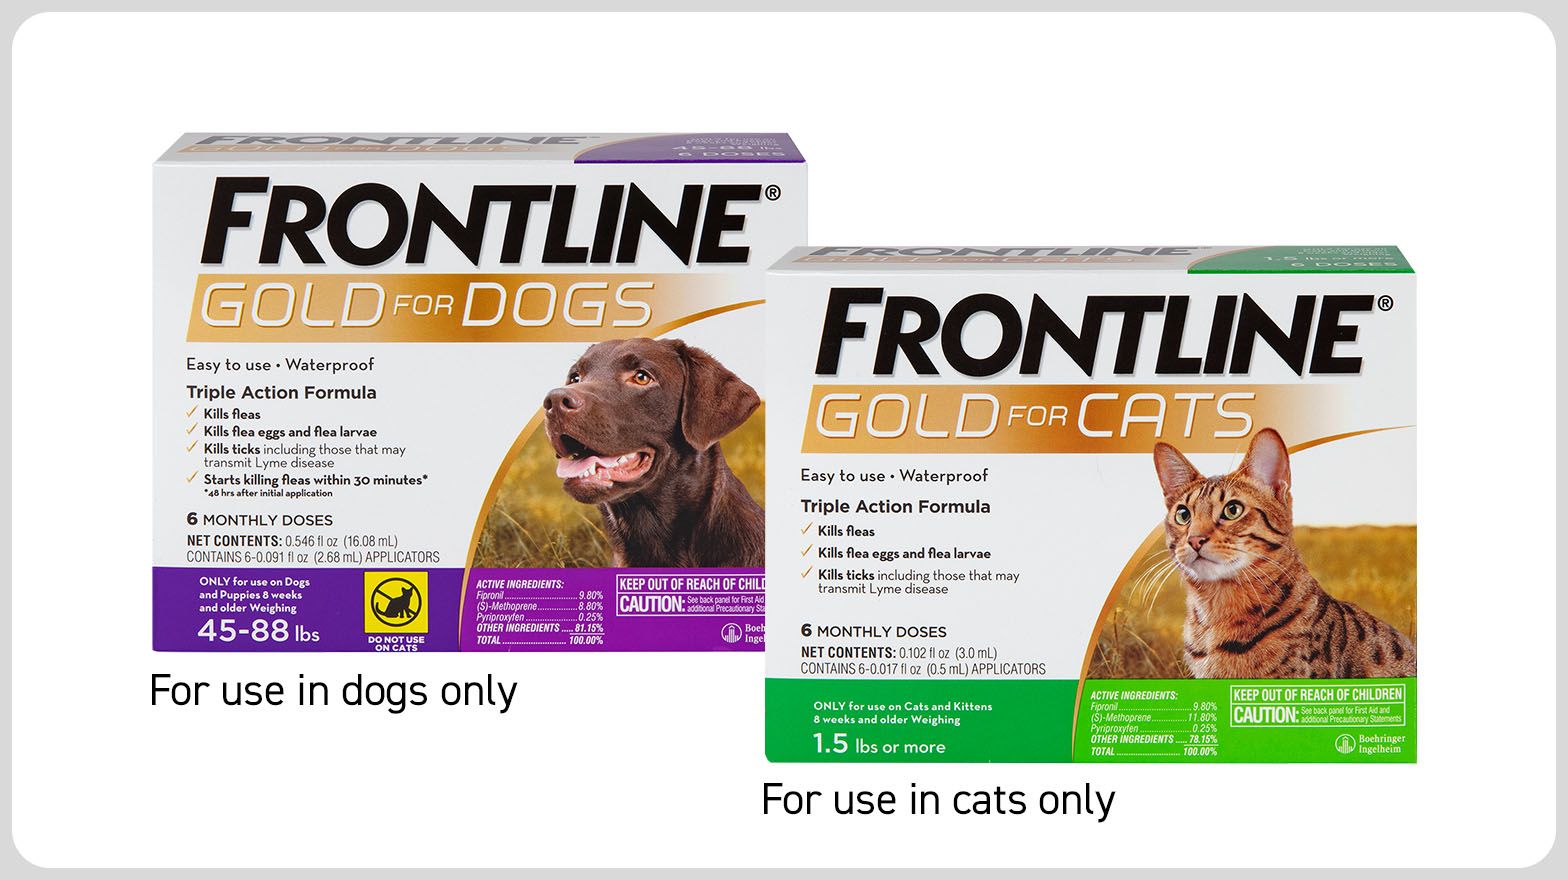 FRONTLINE Gold for Dogs or Cats